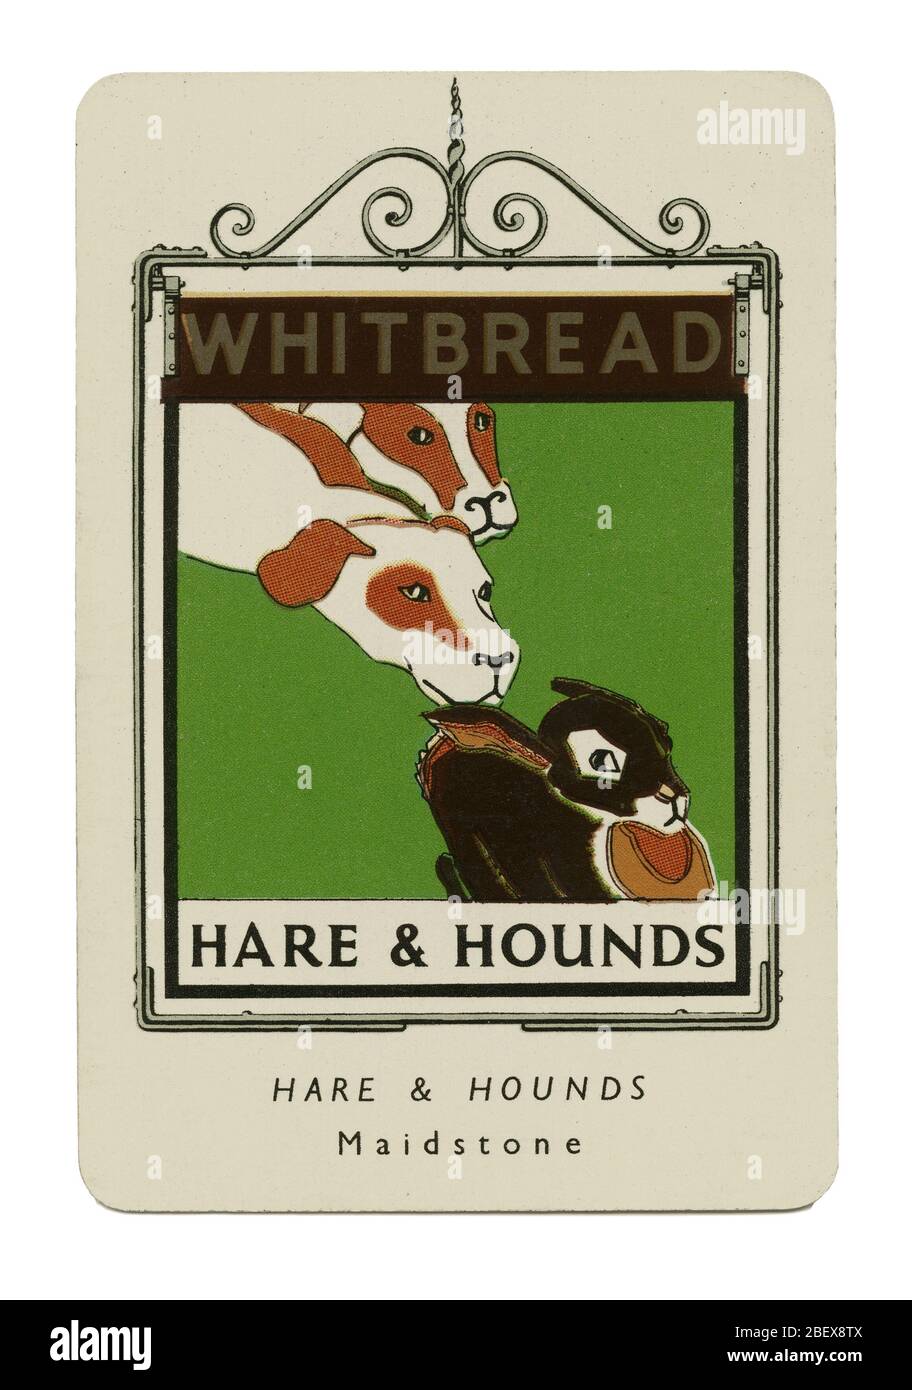 A 1949 miniature metal souvenir pub sign for Whitbread's Brewery. This sign (number 24 in Series 1) featured The Hare and Hounds, Boxley Road, Maidstone, Kent and was designed by Harvey James. The illustration shows hounds chasing a hare. Hare chasing or coursing involves greyhounds and other types of hound pursuing their prey by sight rather than scent. In some countries it is still legal. Stock Photo